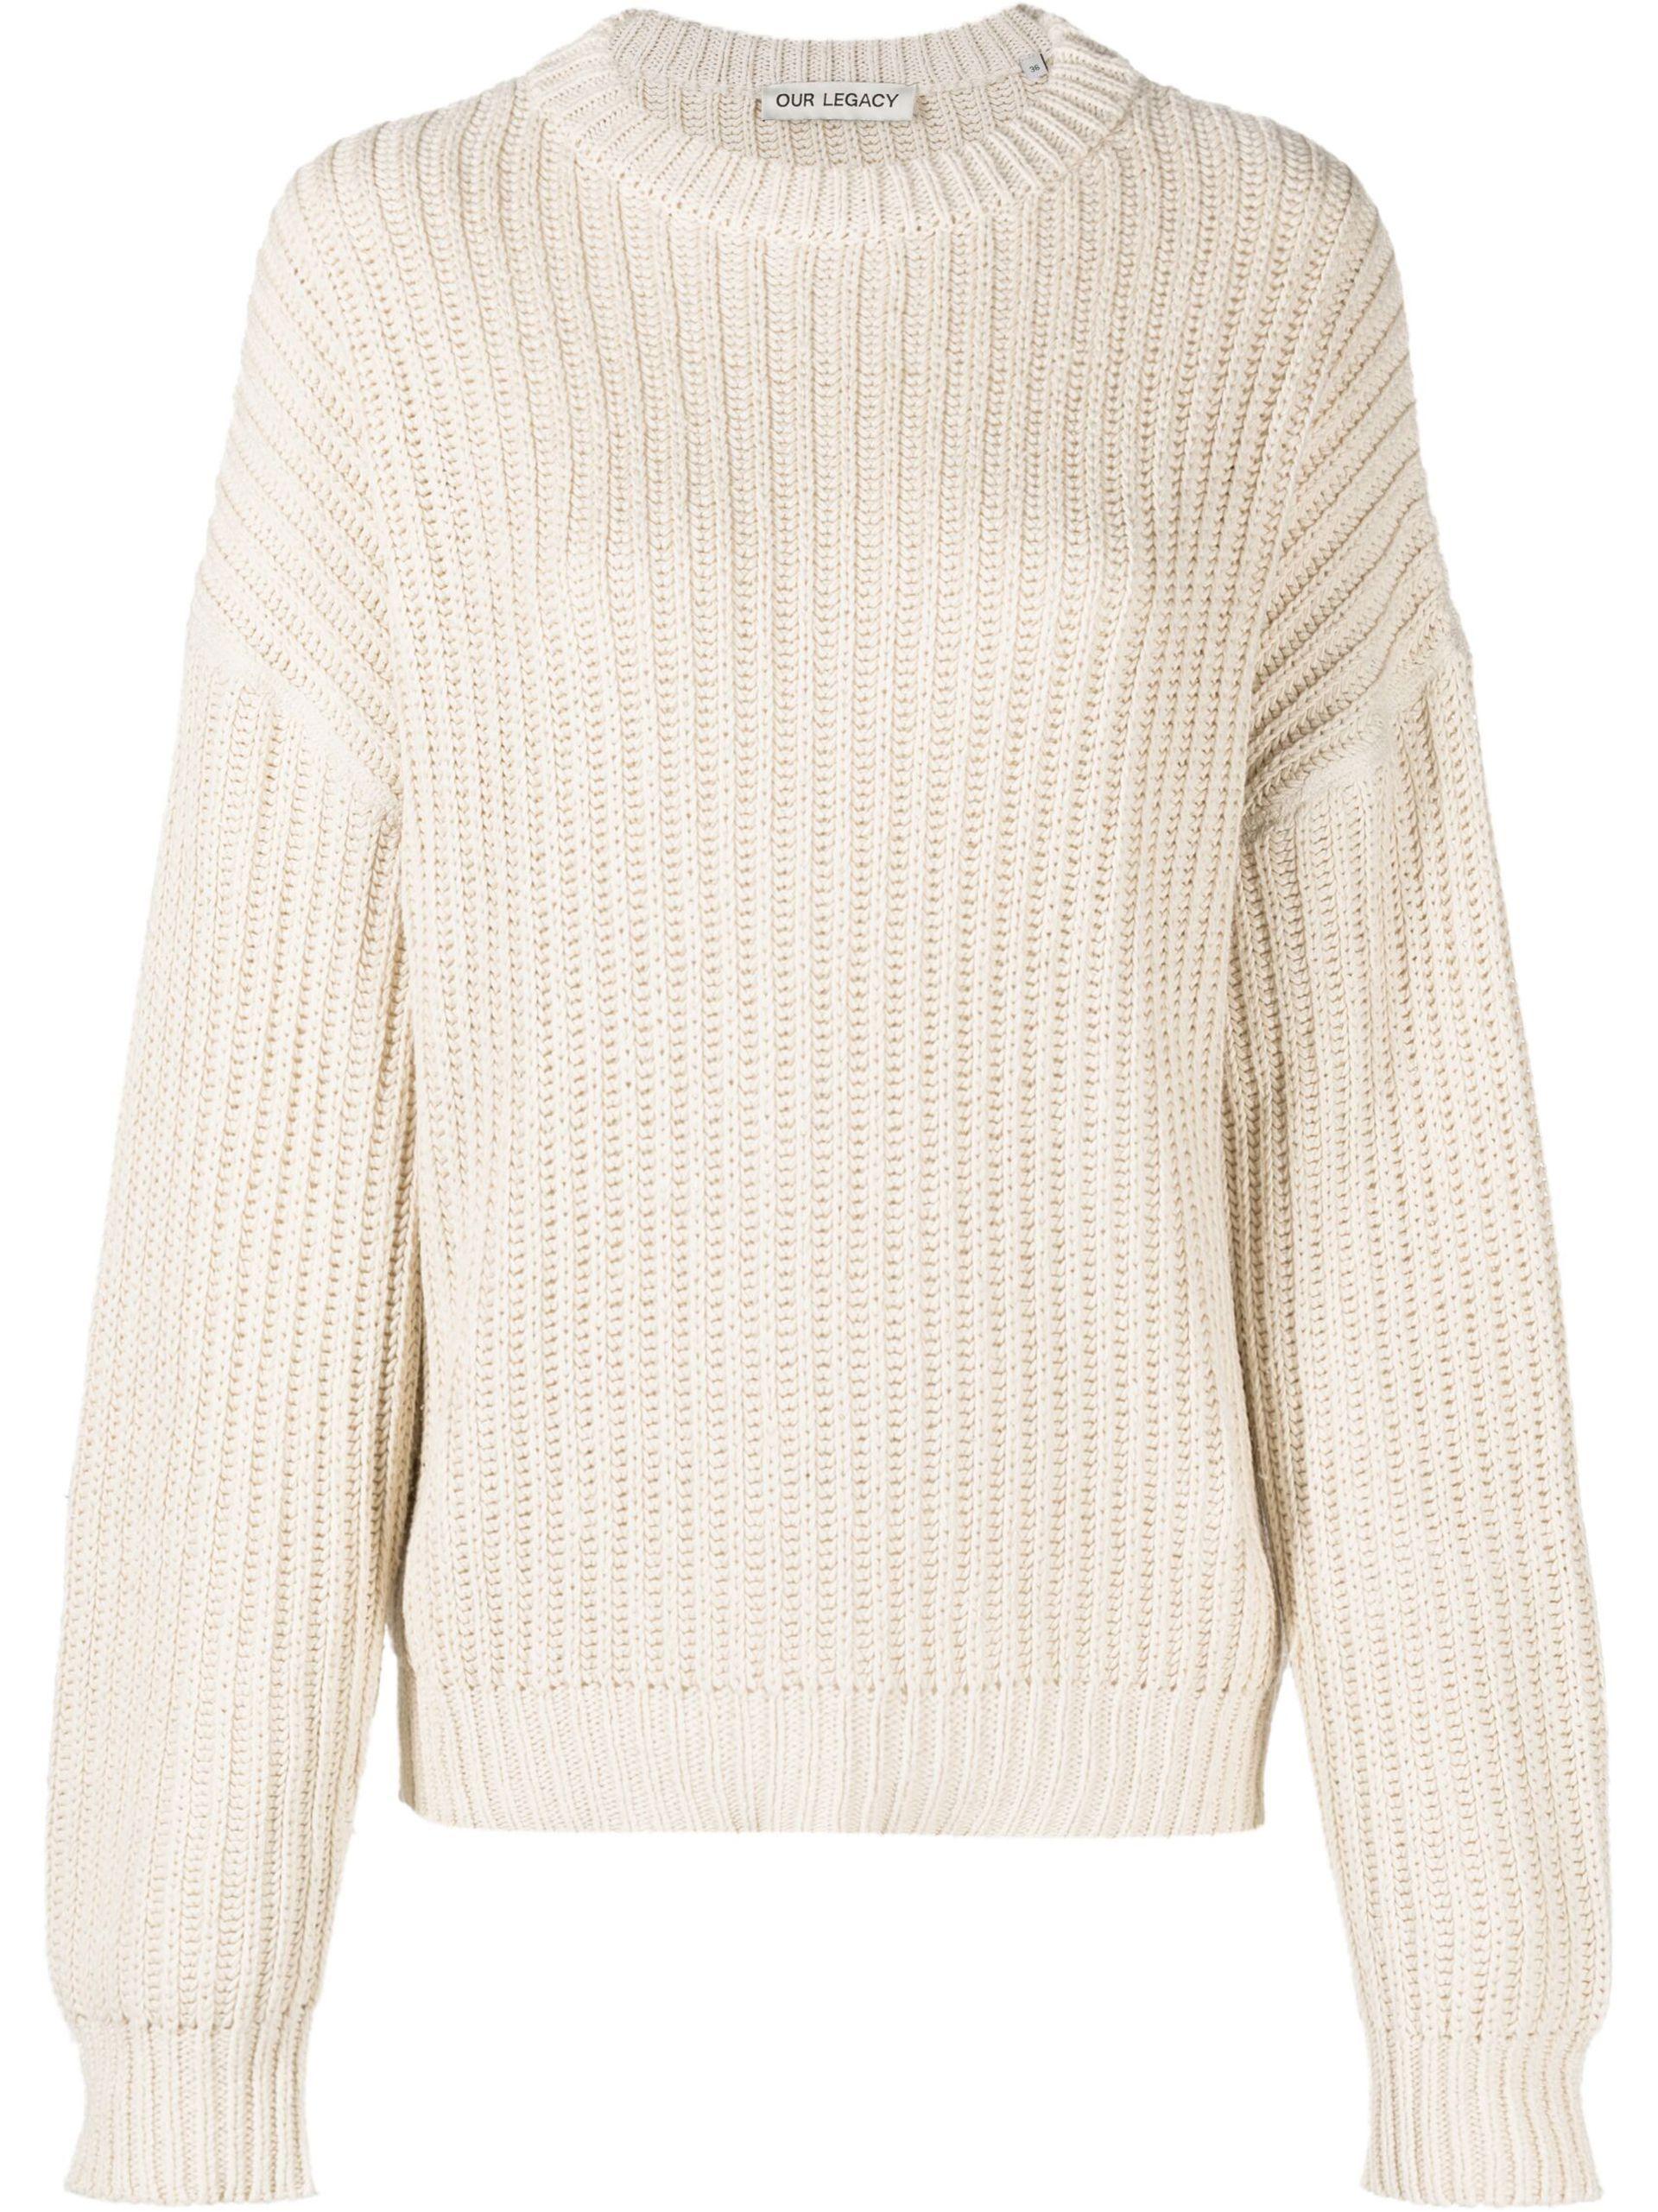 Our Legacy Sonar Intarsia-knit Jumper in Natural | Lyst